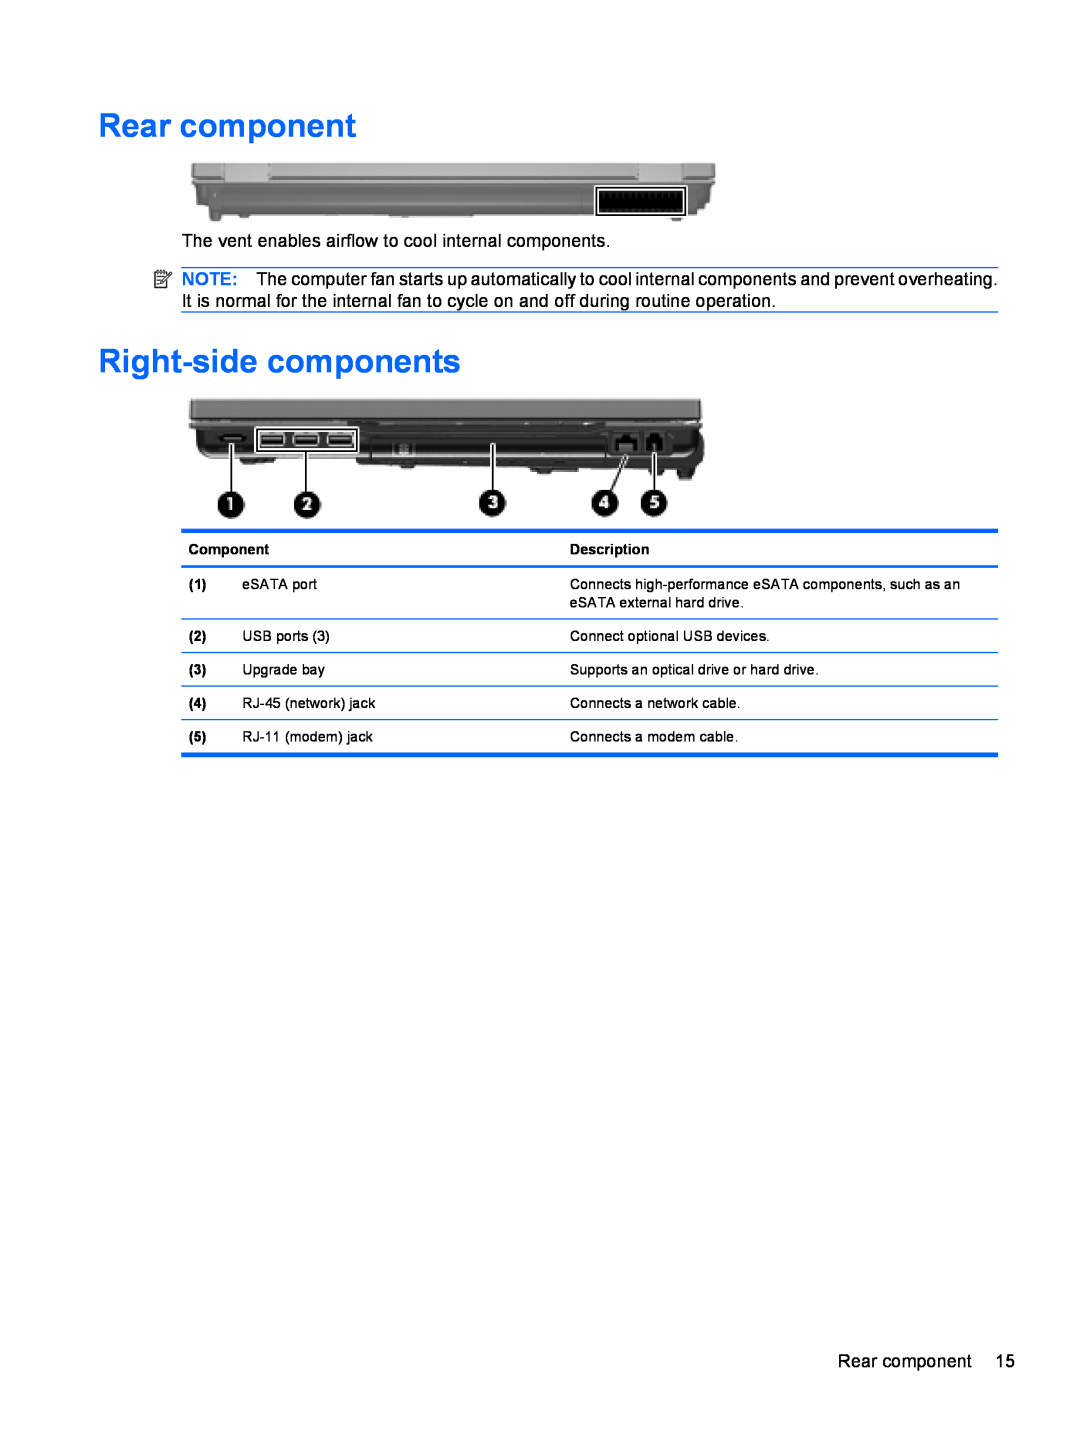 HP FN037UAABA, FN038UAABA manual Rear component, Right-side components 